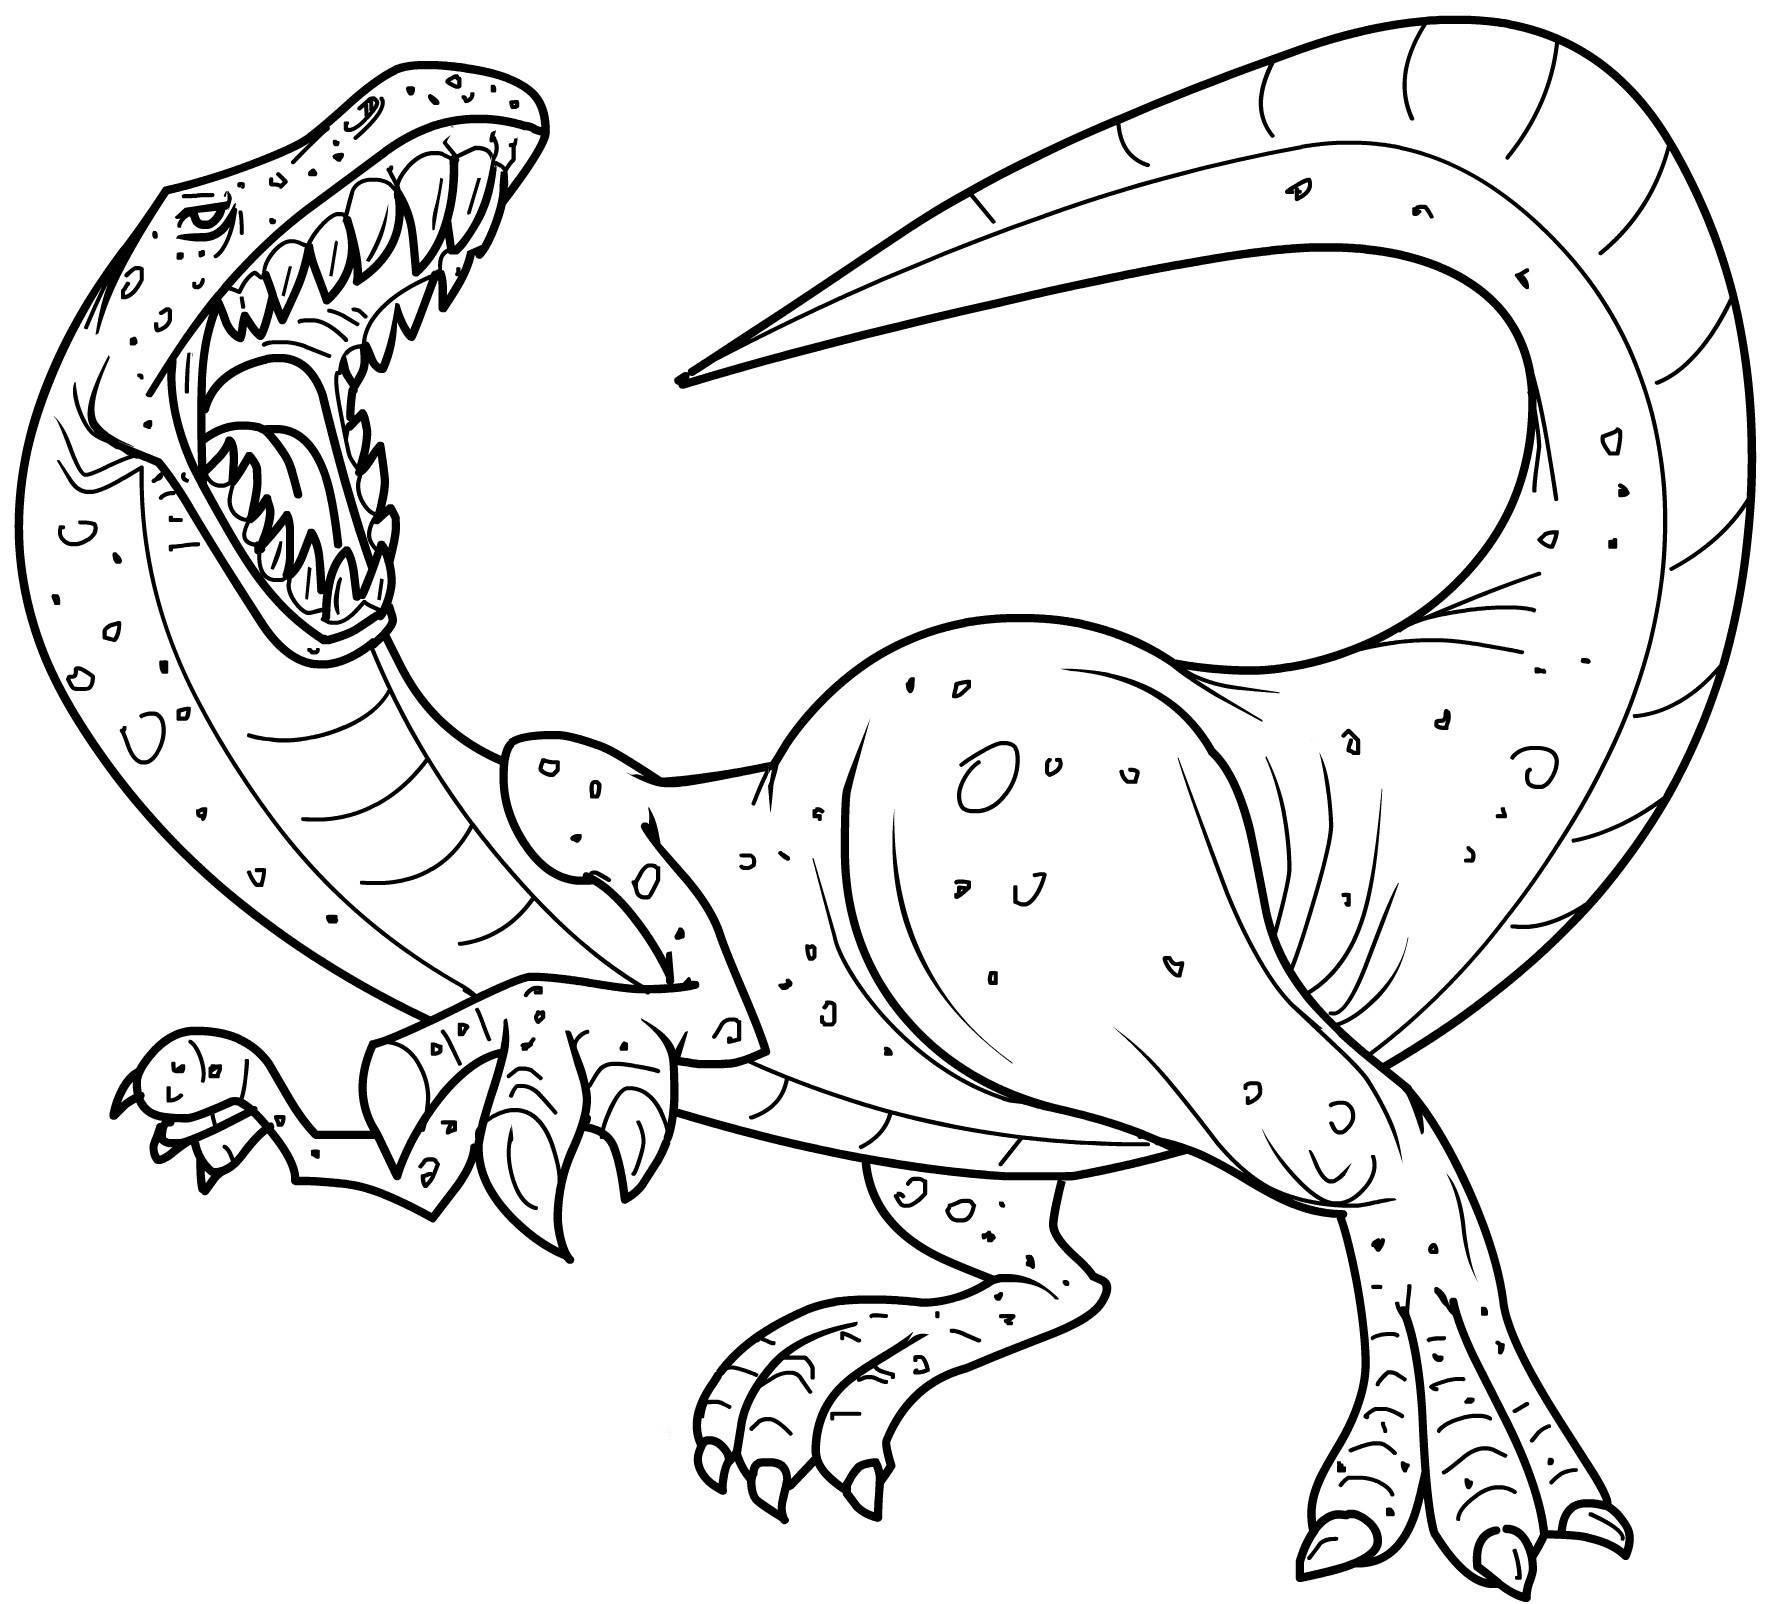 Dinosaur Coloring Pages For Toddlers
 Free Printable Dinosaur Coloring Pages For Kids